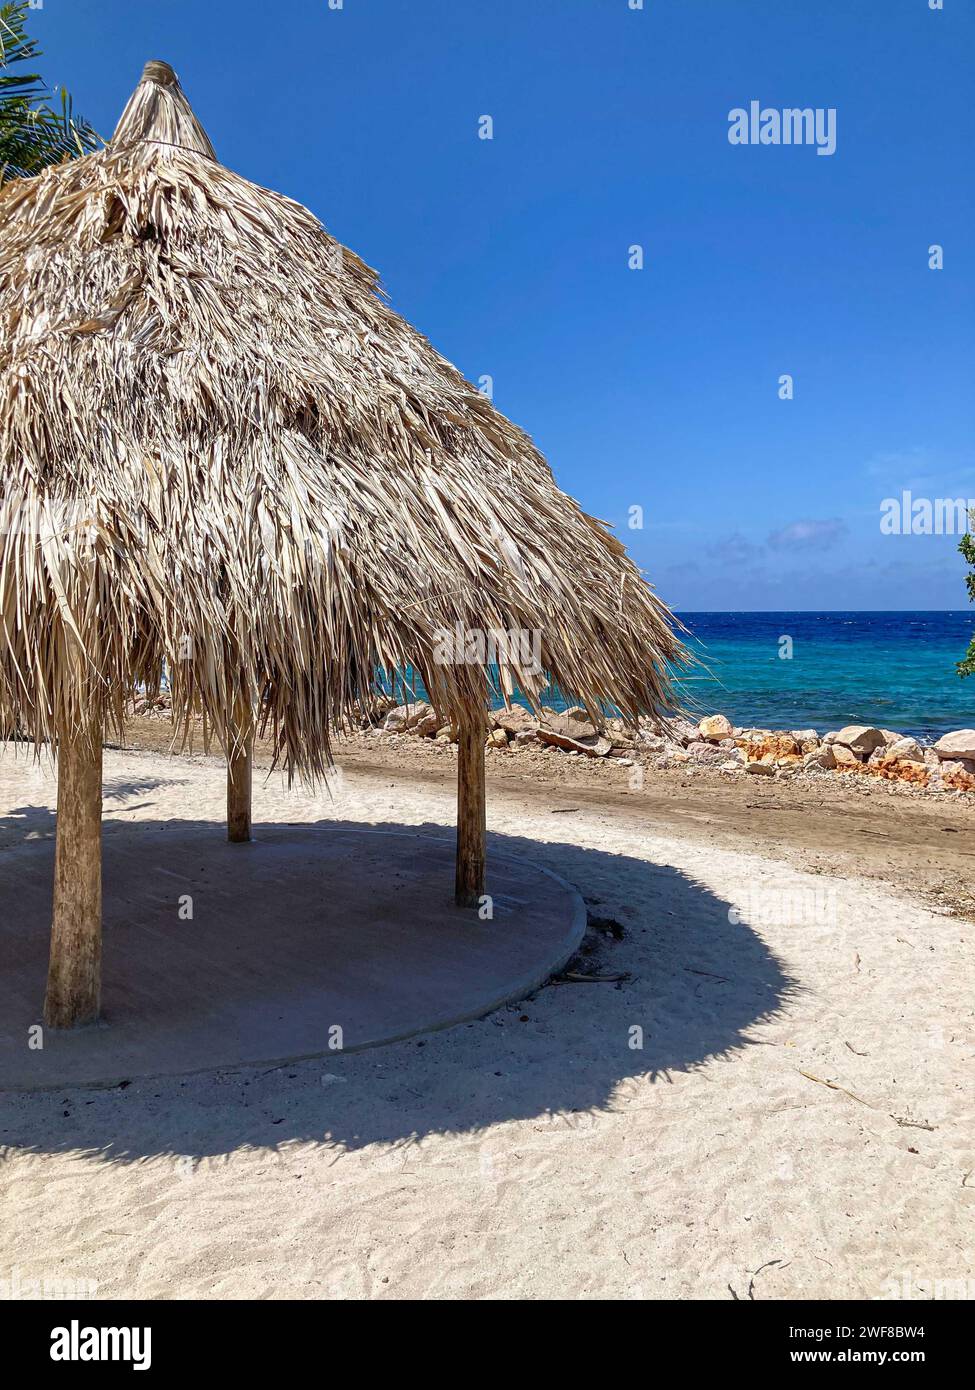 Covered thatched roofs in Public picnic area, Curacao Stock Photo